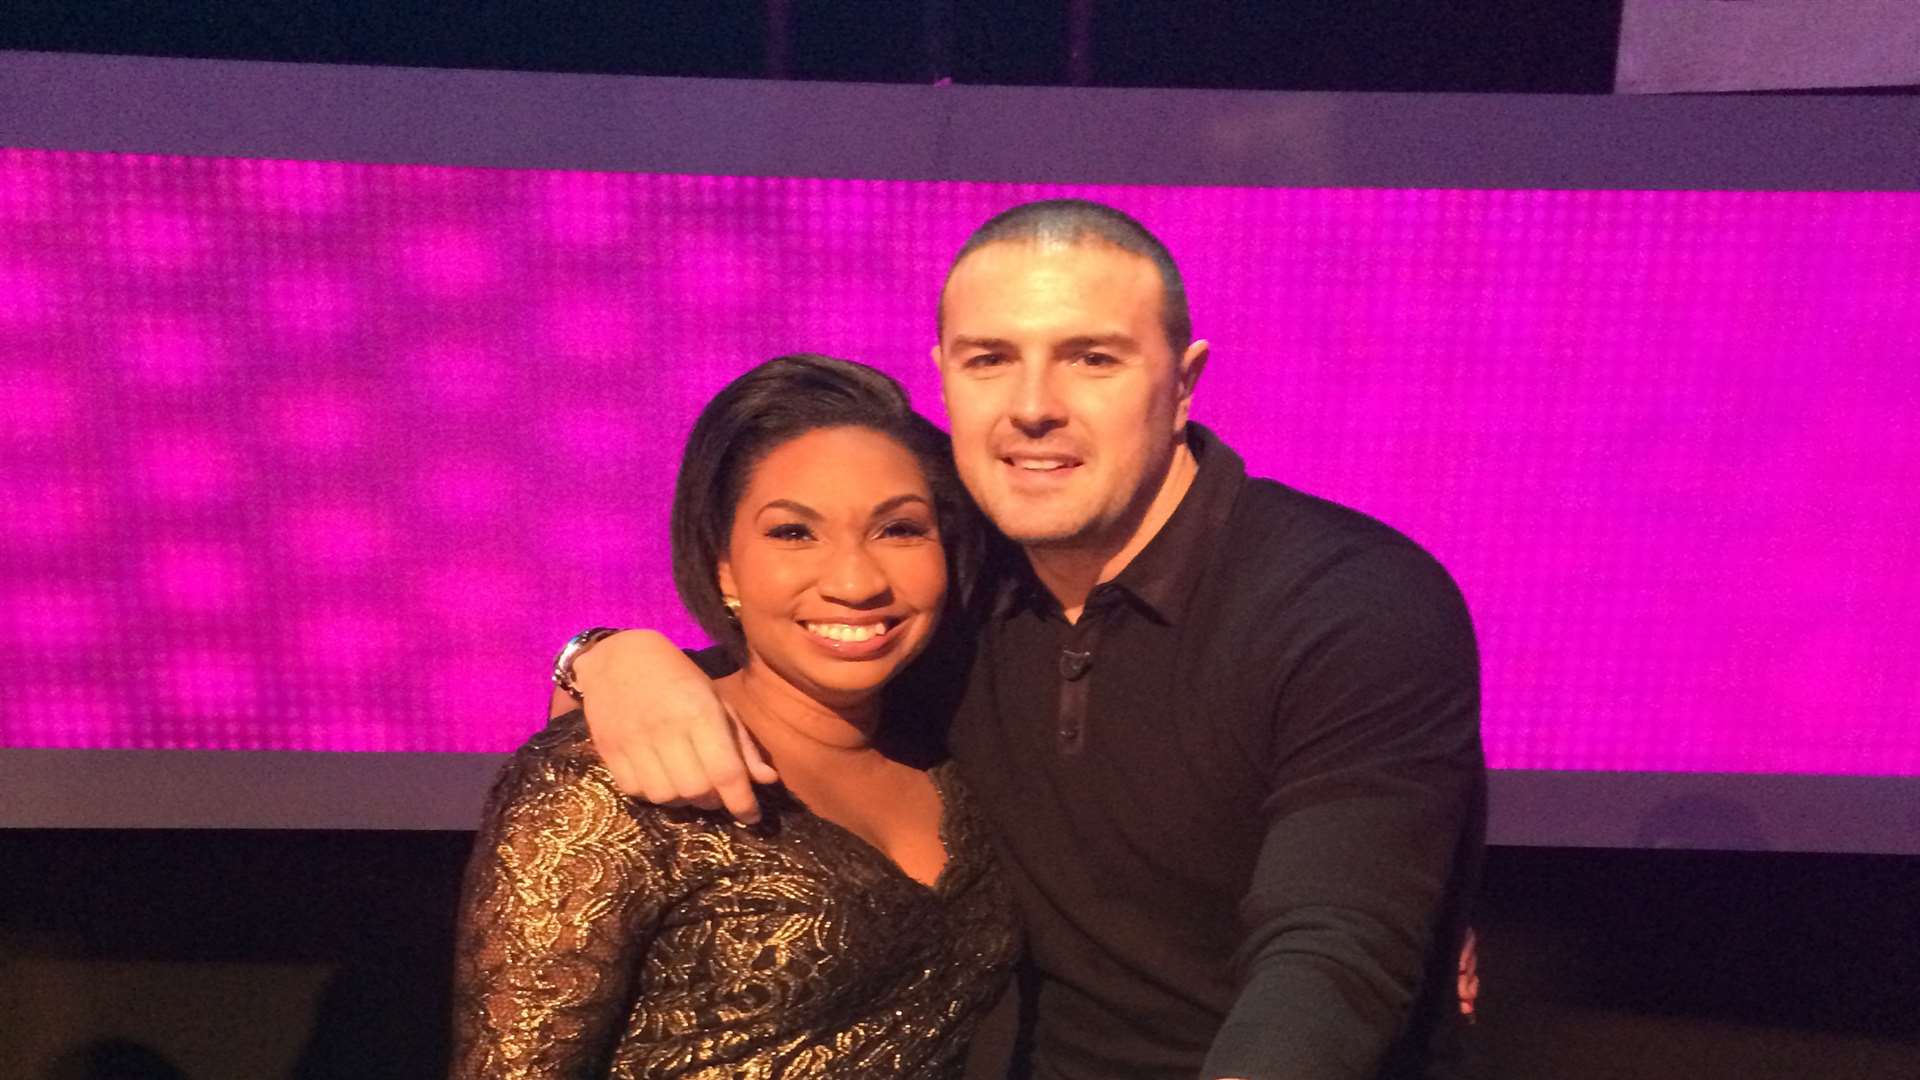 Janine Mars on Take Me Out with presenter Paddy McGuinness.